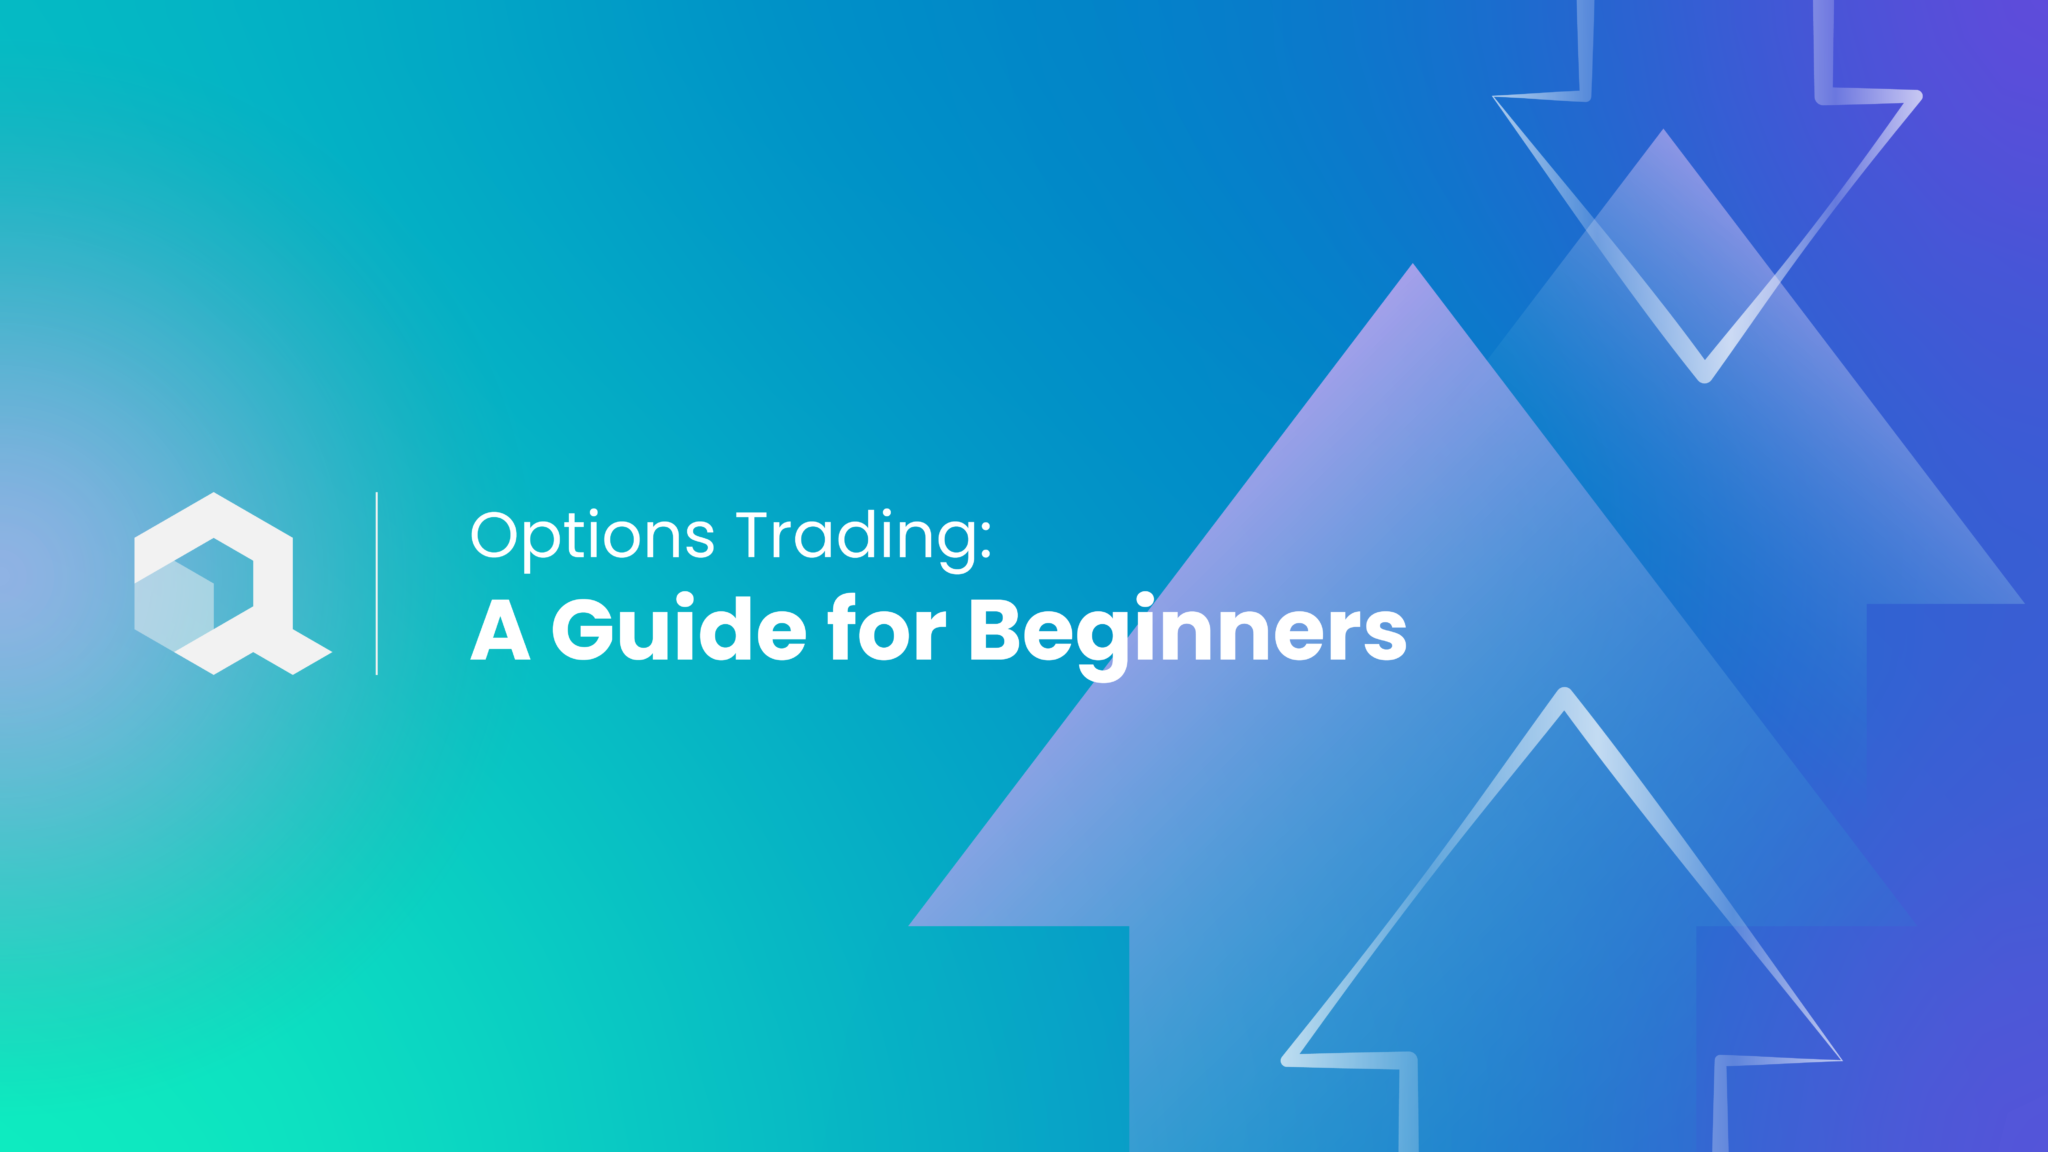 Options Trading: A Guide for Beginners